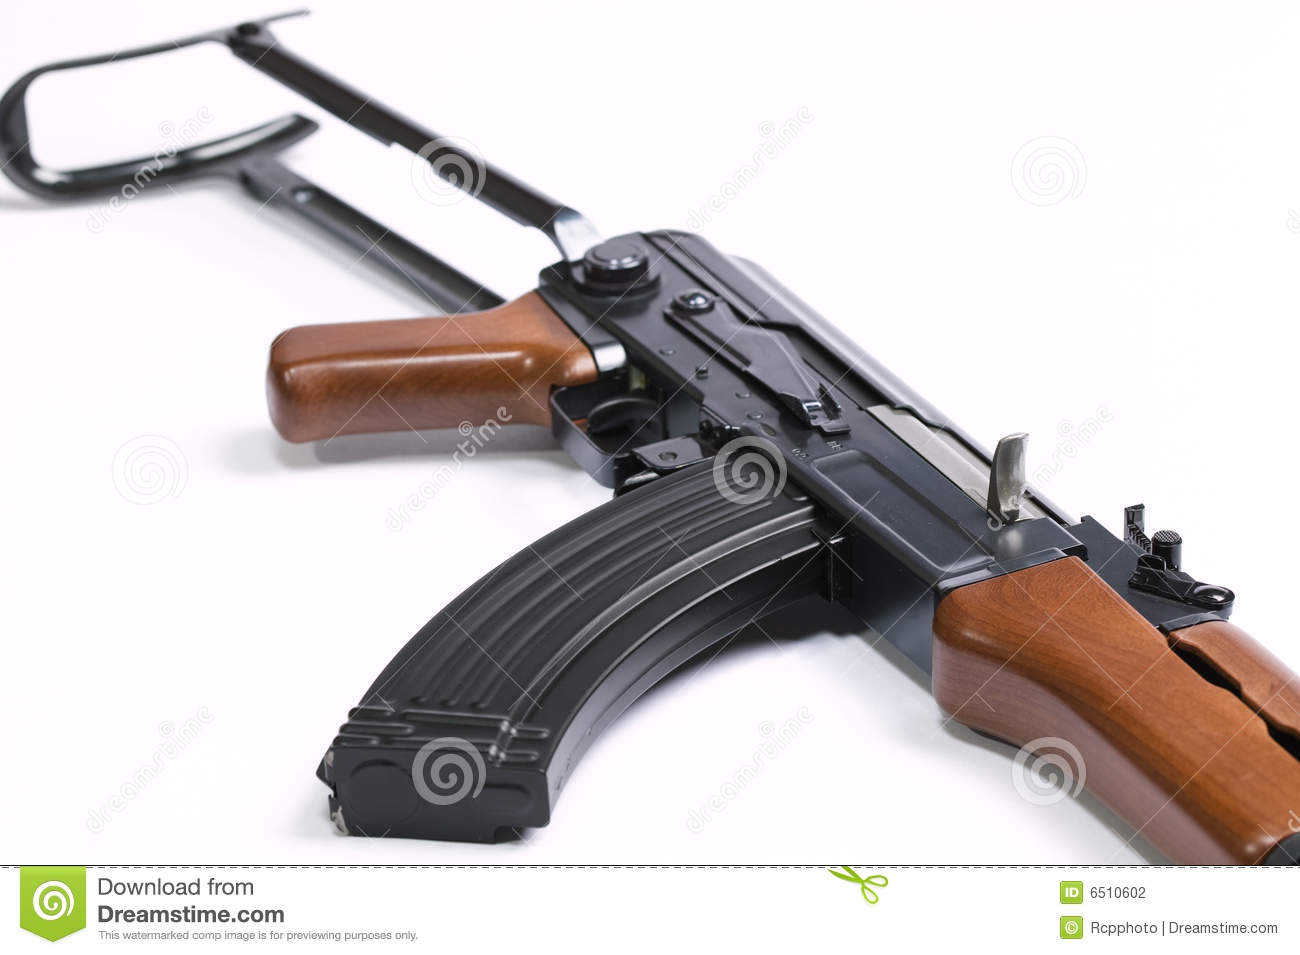 AK-47 Rifle Backgrounds on Wallpapers Vista